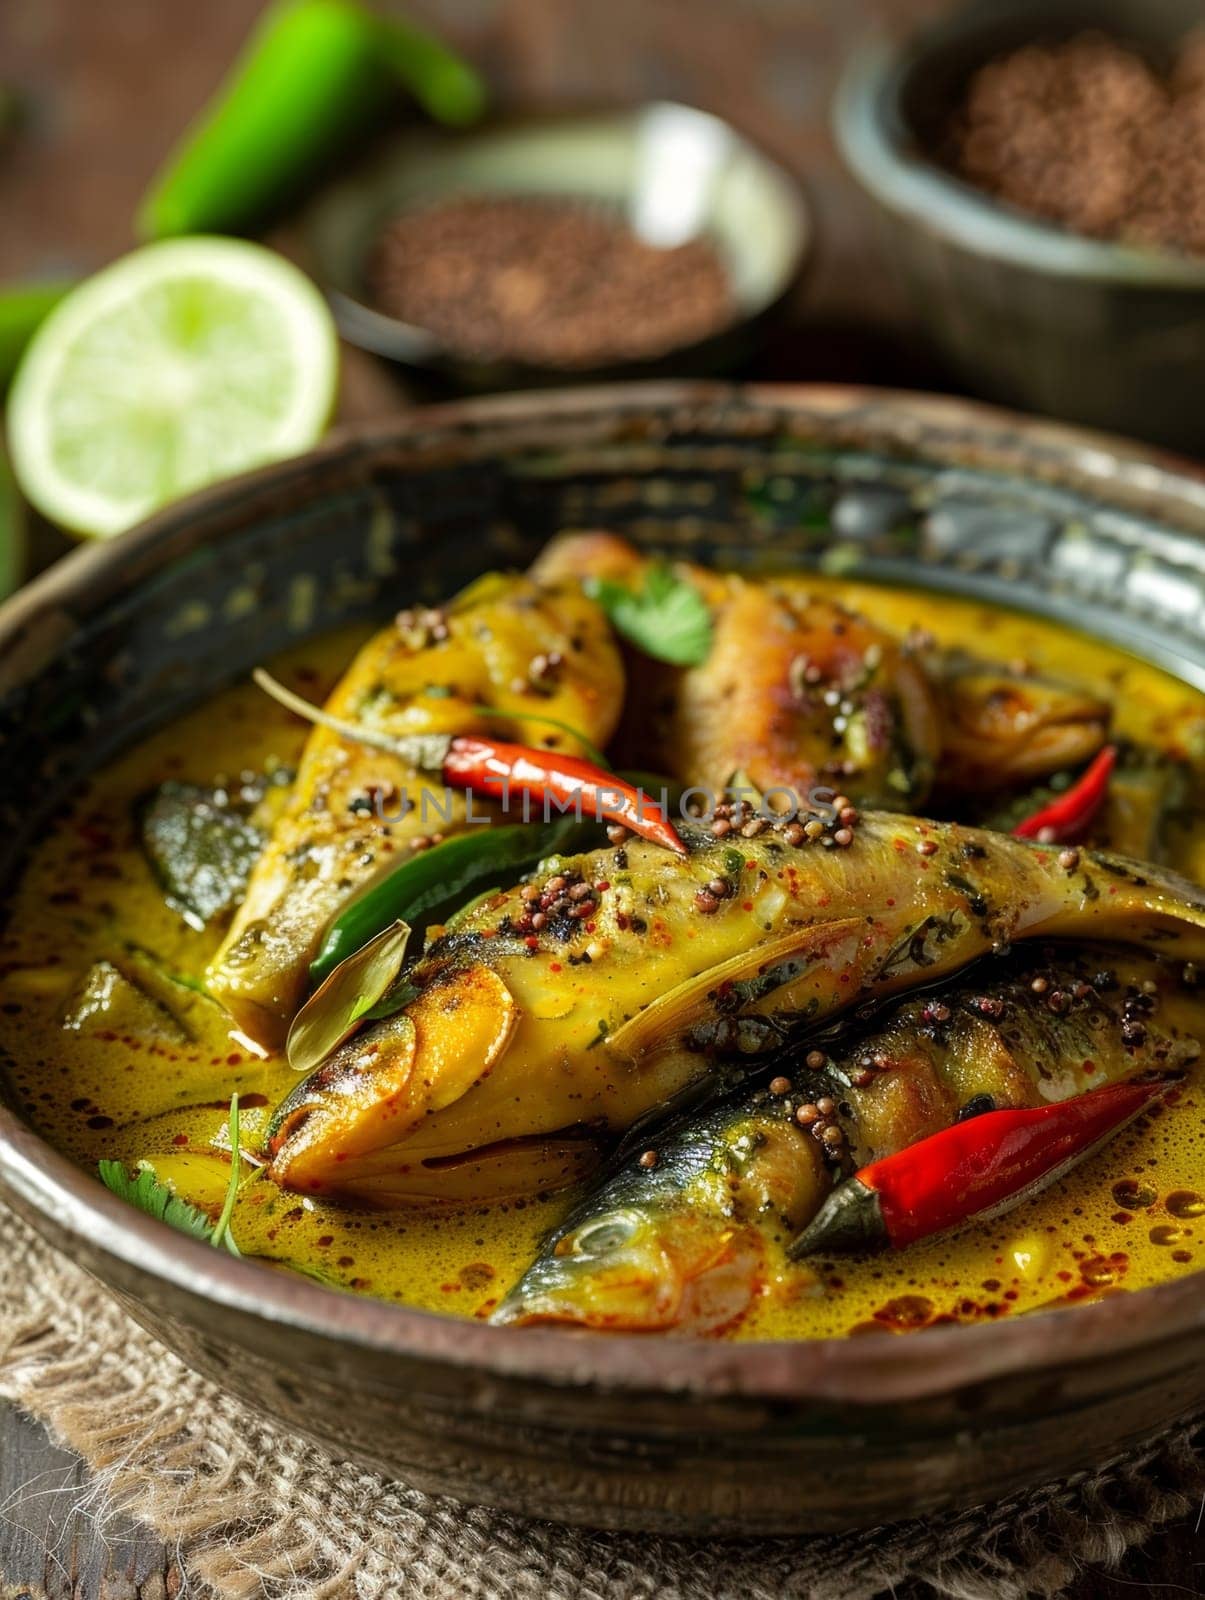 Authentic Bangladeshi hilsa fish curry served in a traditional bowl, seasoned with aromatic turmeric and mustard seeds. This flavorful and creamy dish represents rich culinary heritage of Bangladesh by sfinks